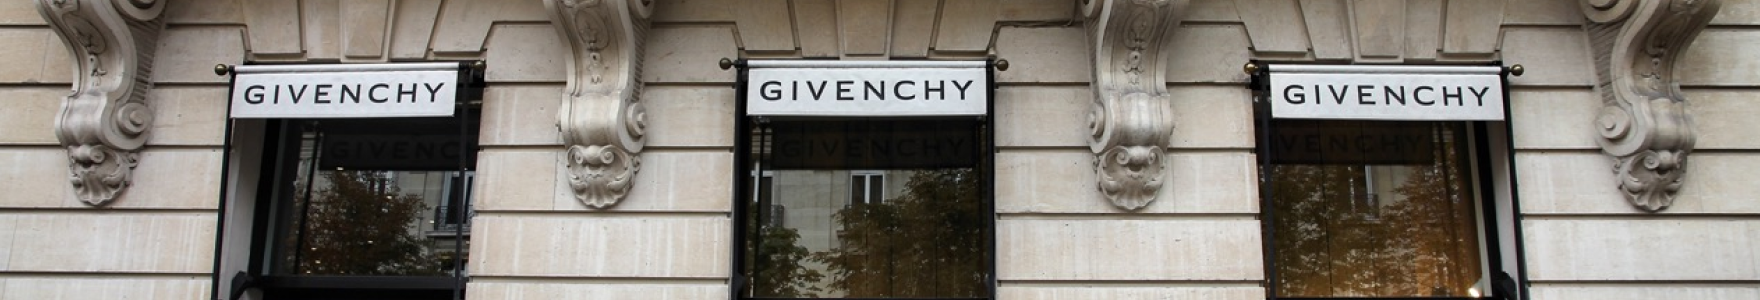 Givenchy 背景